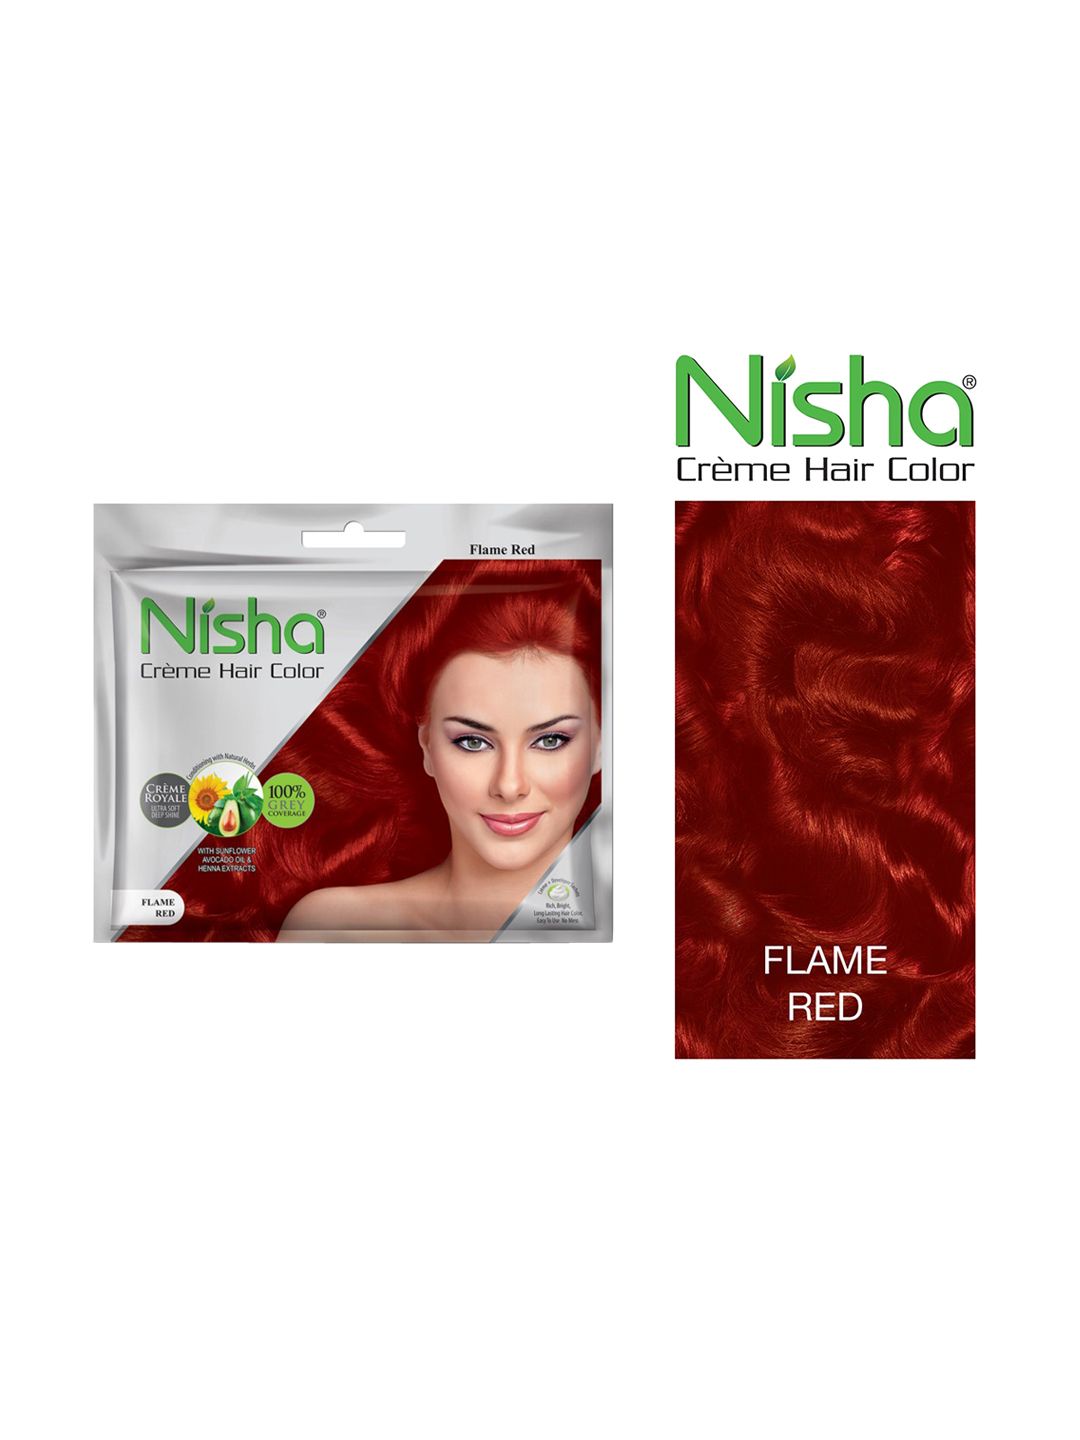 Nisha Pack of 6 Creme Hair Colour 300g - Flame Red Price in India